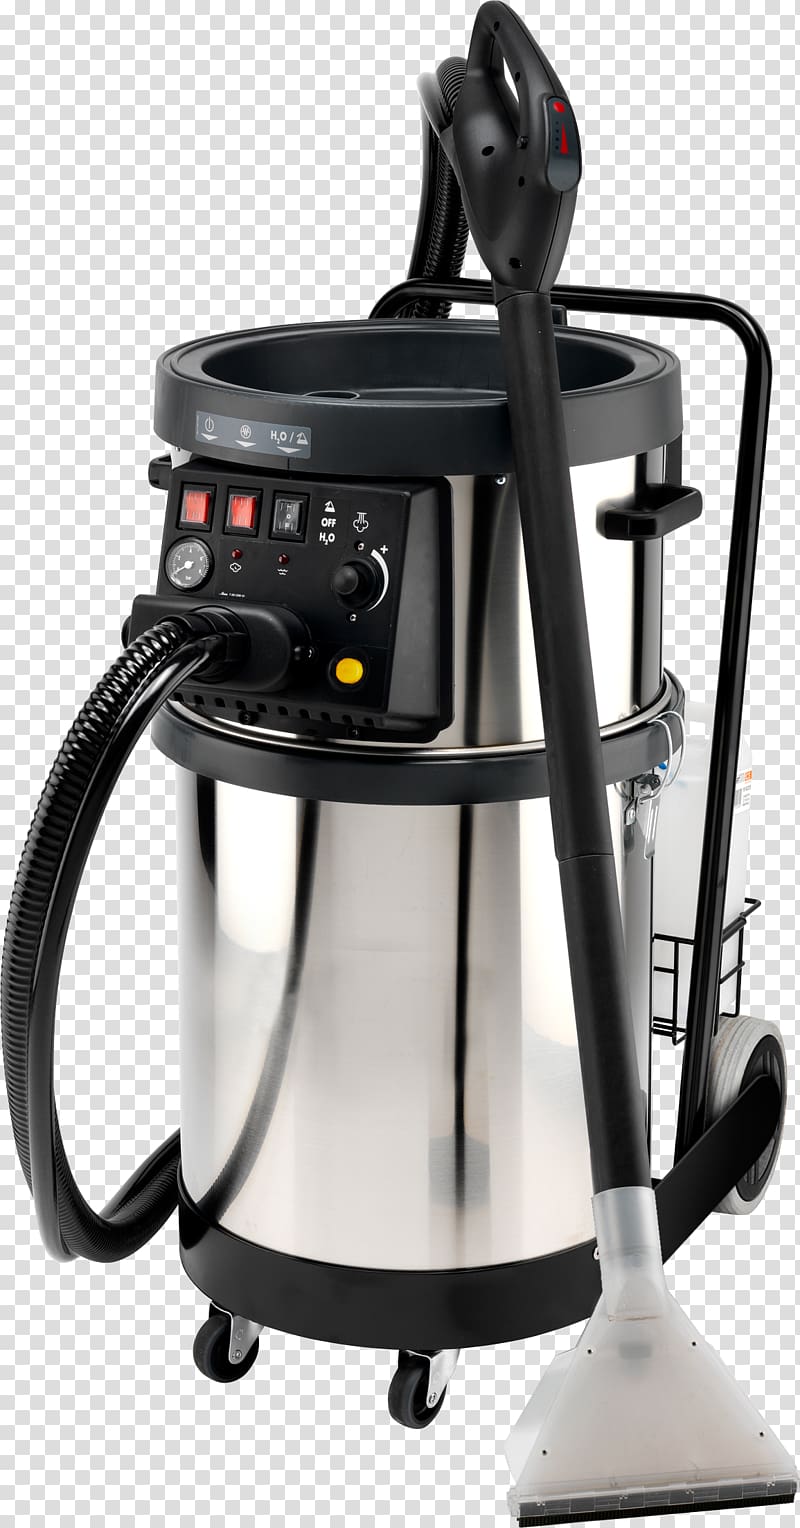 Vapor steam cleaner Vacuum cleaner Steam cleaning, taurus transparent background PNG clipart